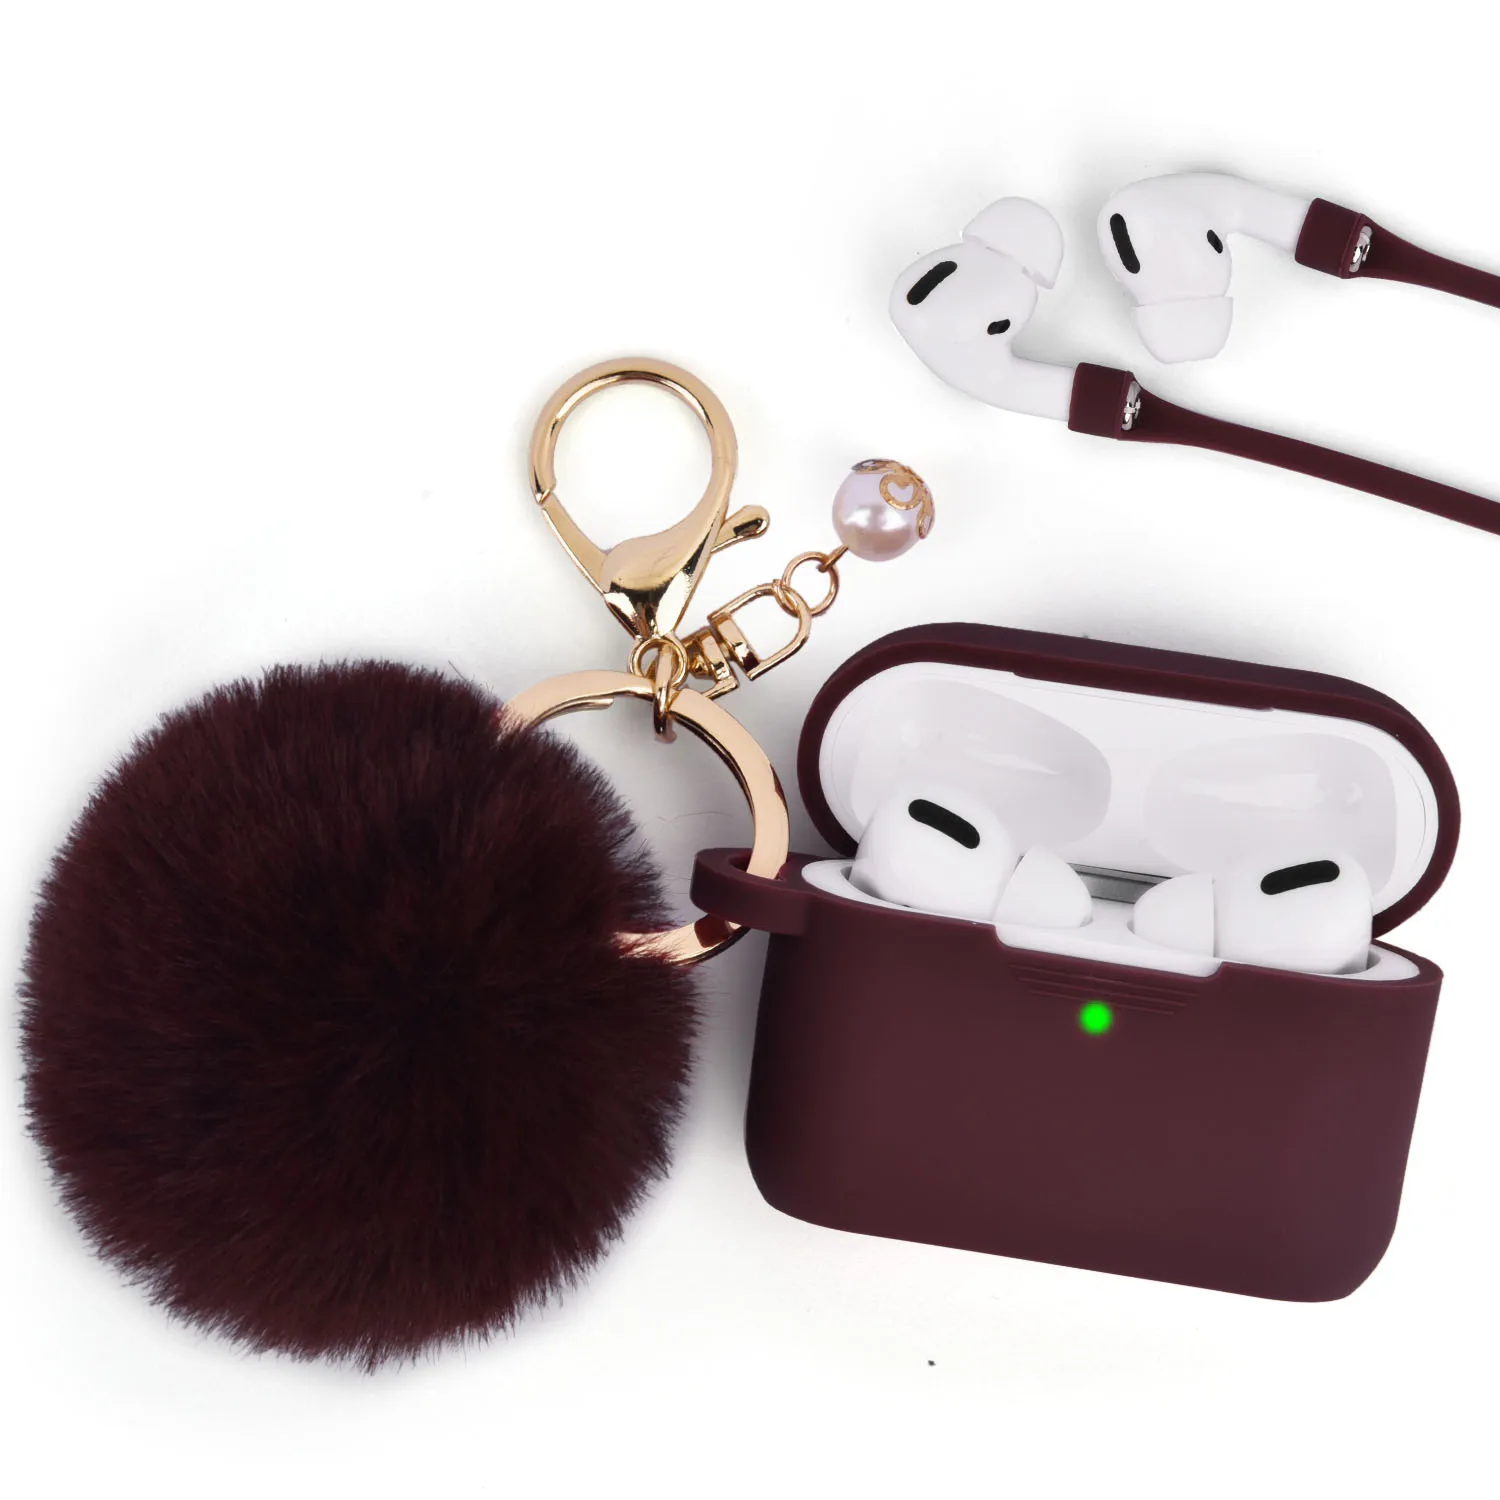 

Silicone Cover Compatible with Apple AirPod Pro Charging Case, Cute Furry Pompom Ball Keychain for Airpod Case, All color is available